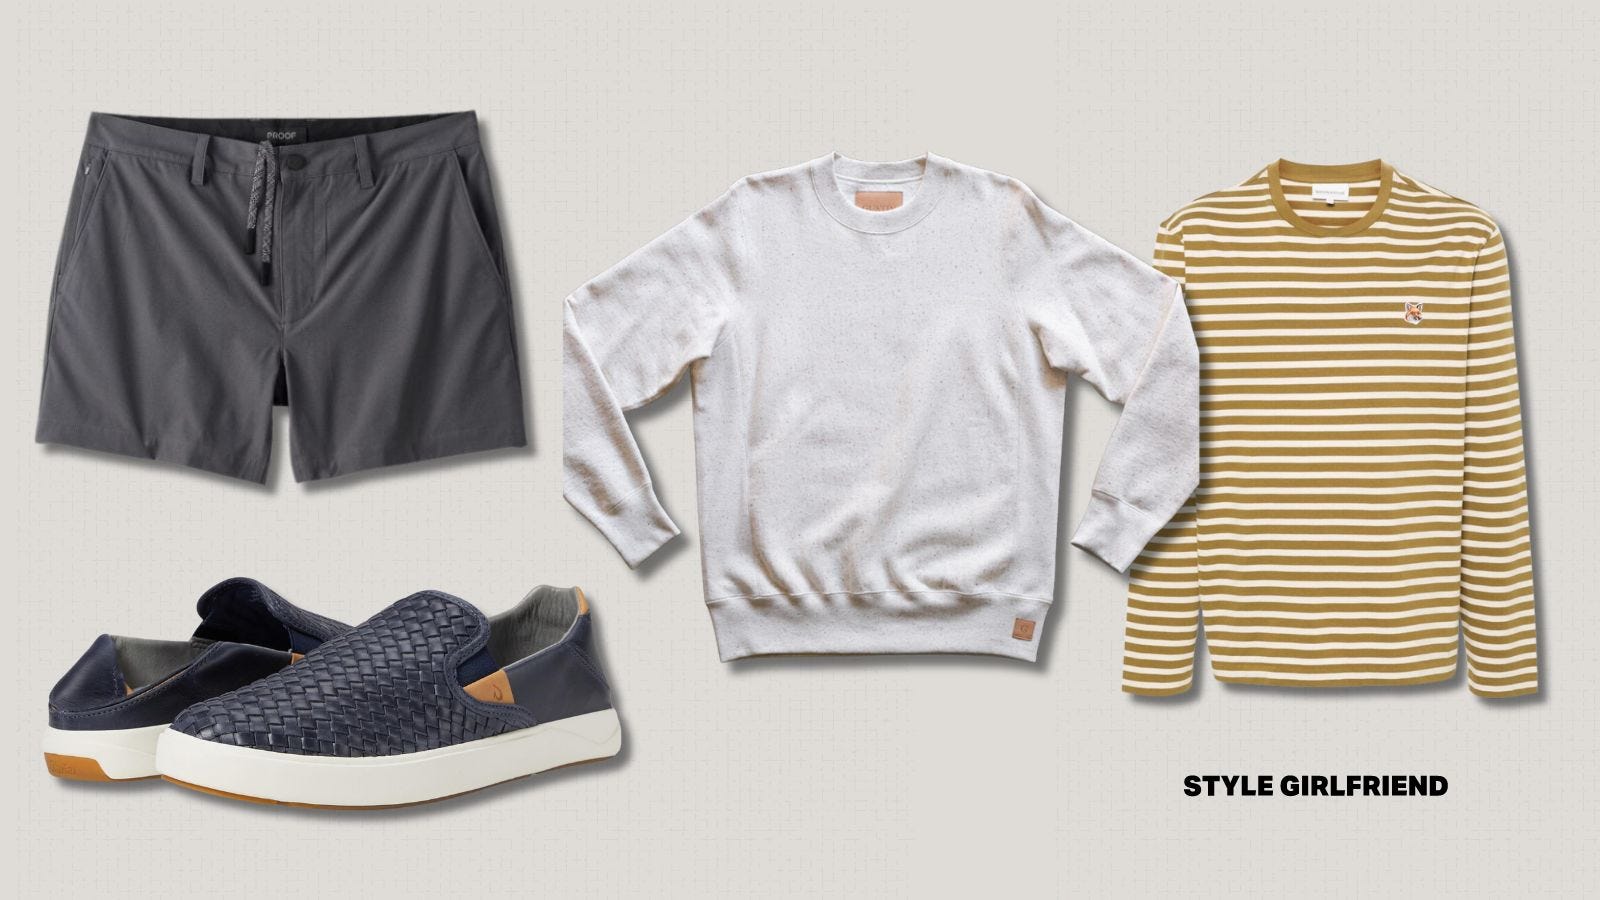 casual men's outfit featuring grey drawstring shorts, leather slip-on loafers, a grey crewneck sweatshirt, and yellow striped long-sleeve shirt